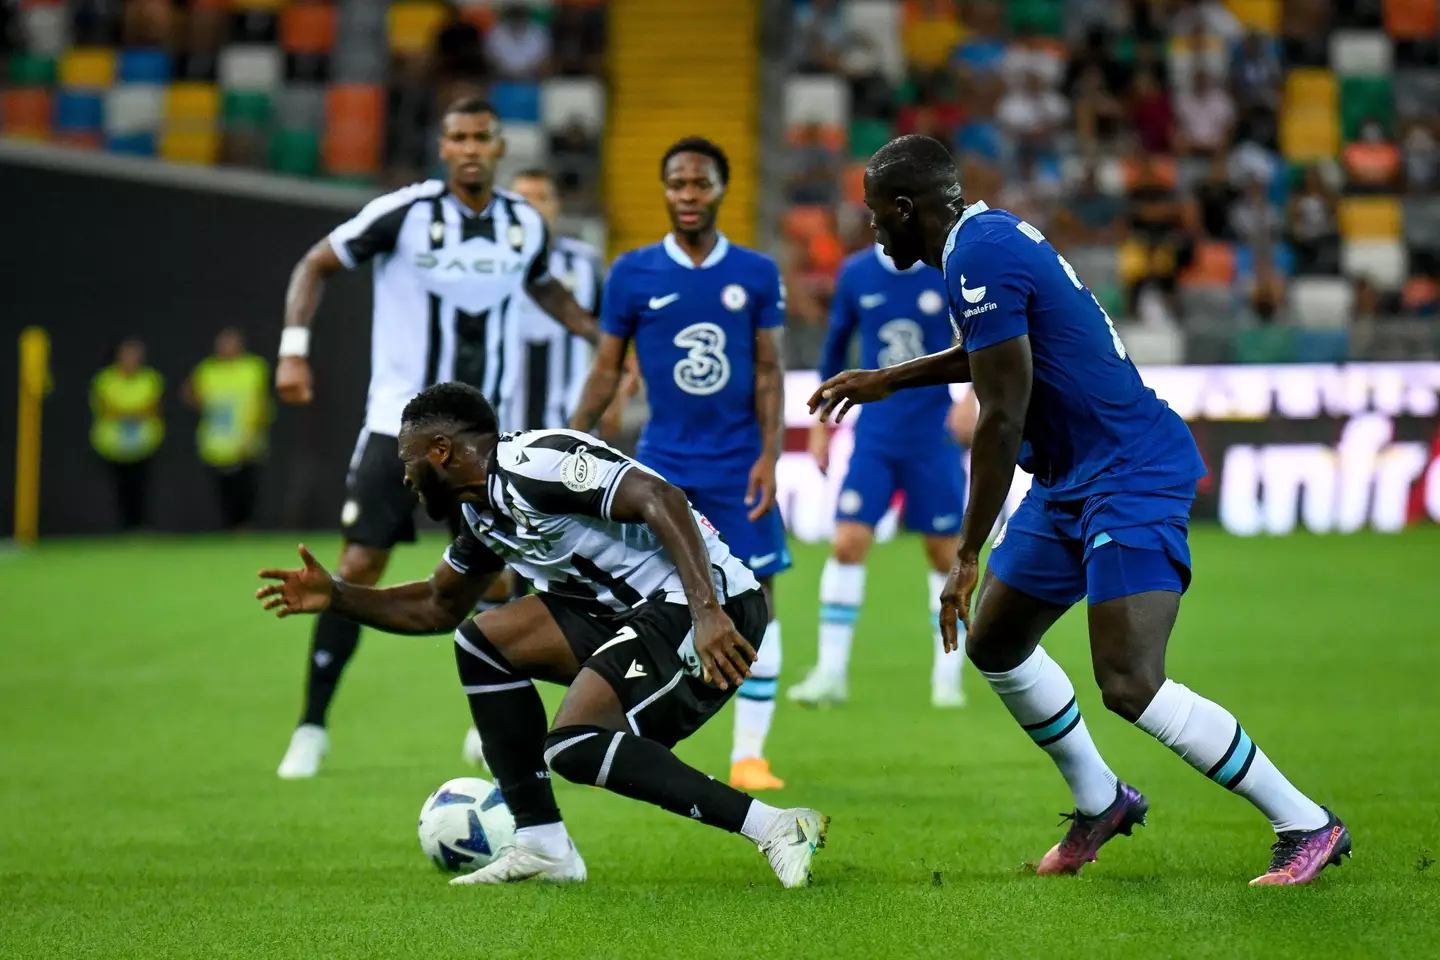 Chelsea in action against Udinese. (Alamy)